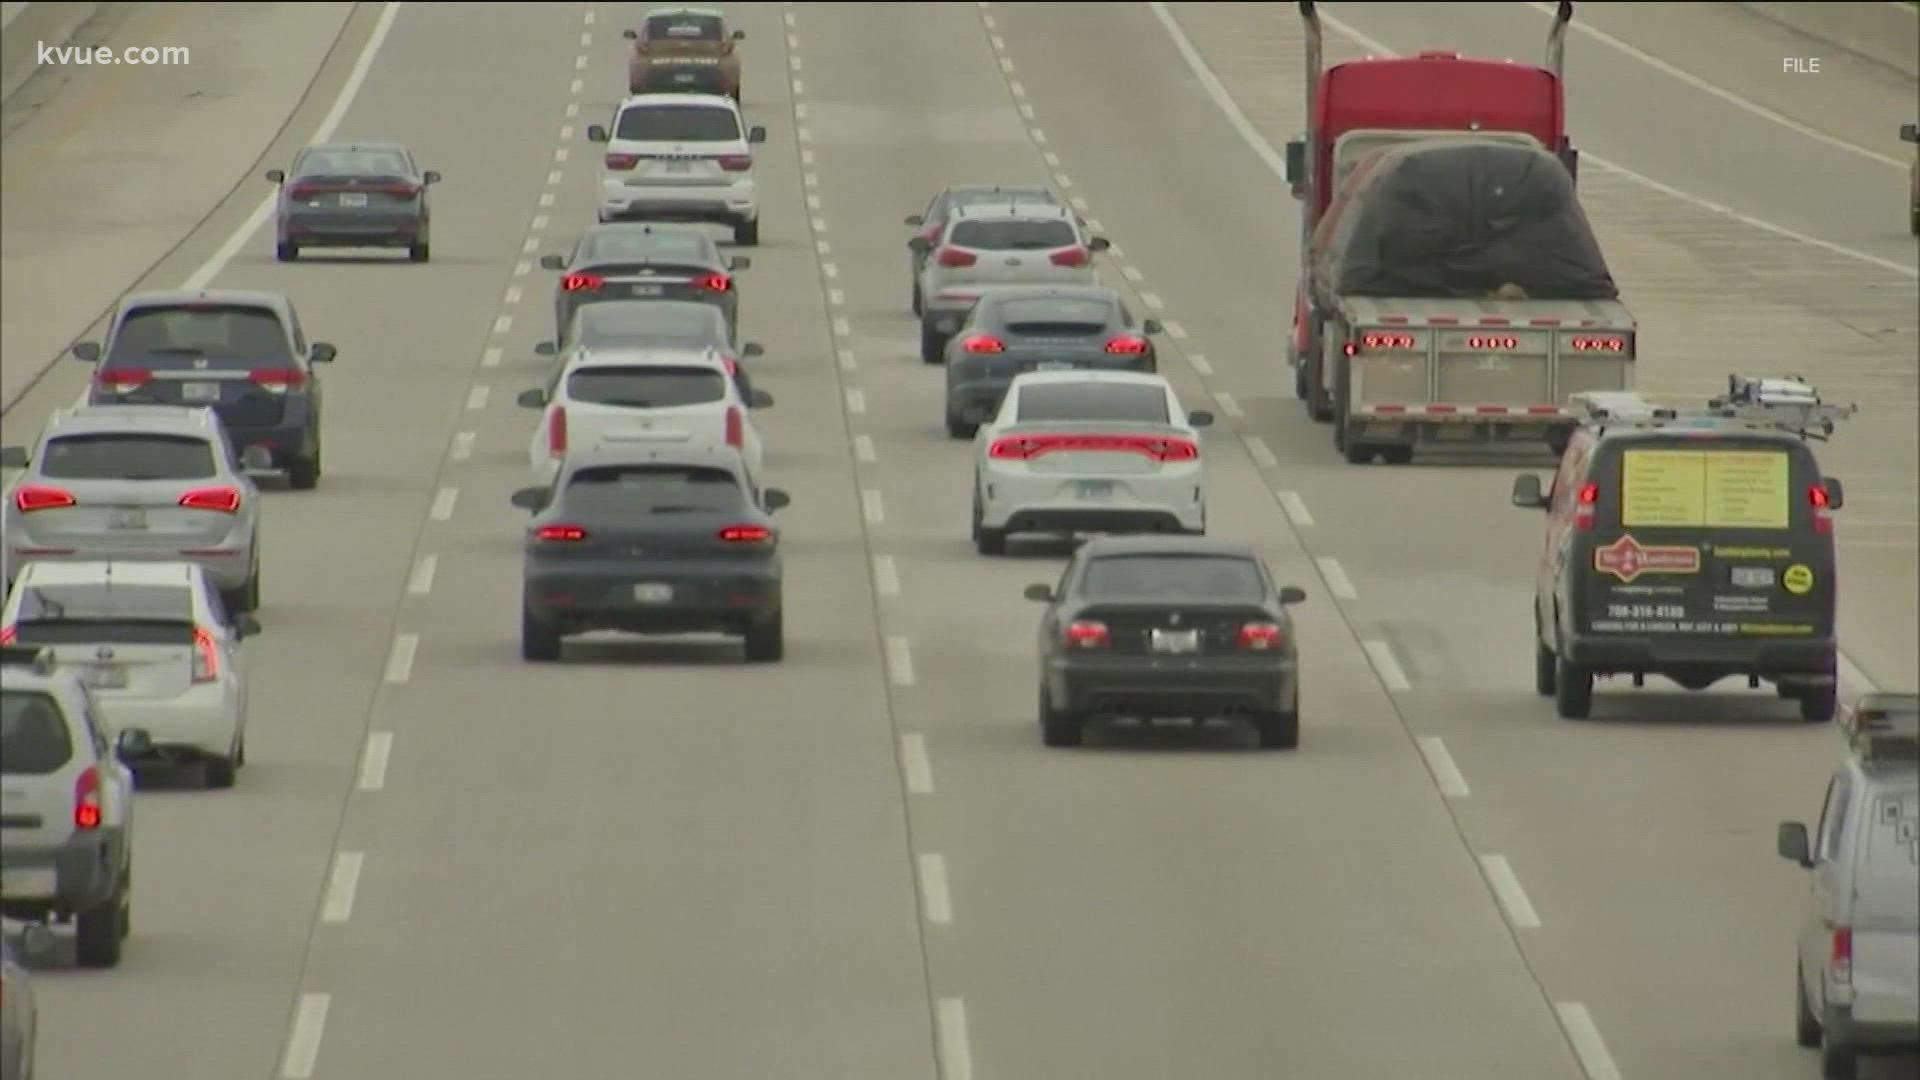 The department reported a 16% increase in speed-related crashes on Texas roads last year.